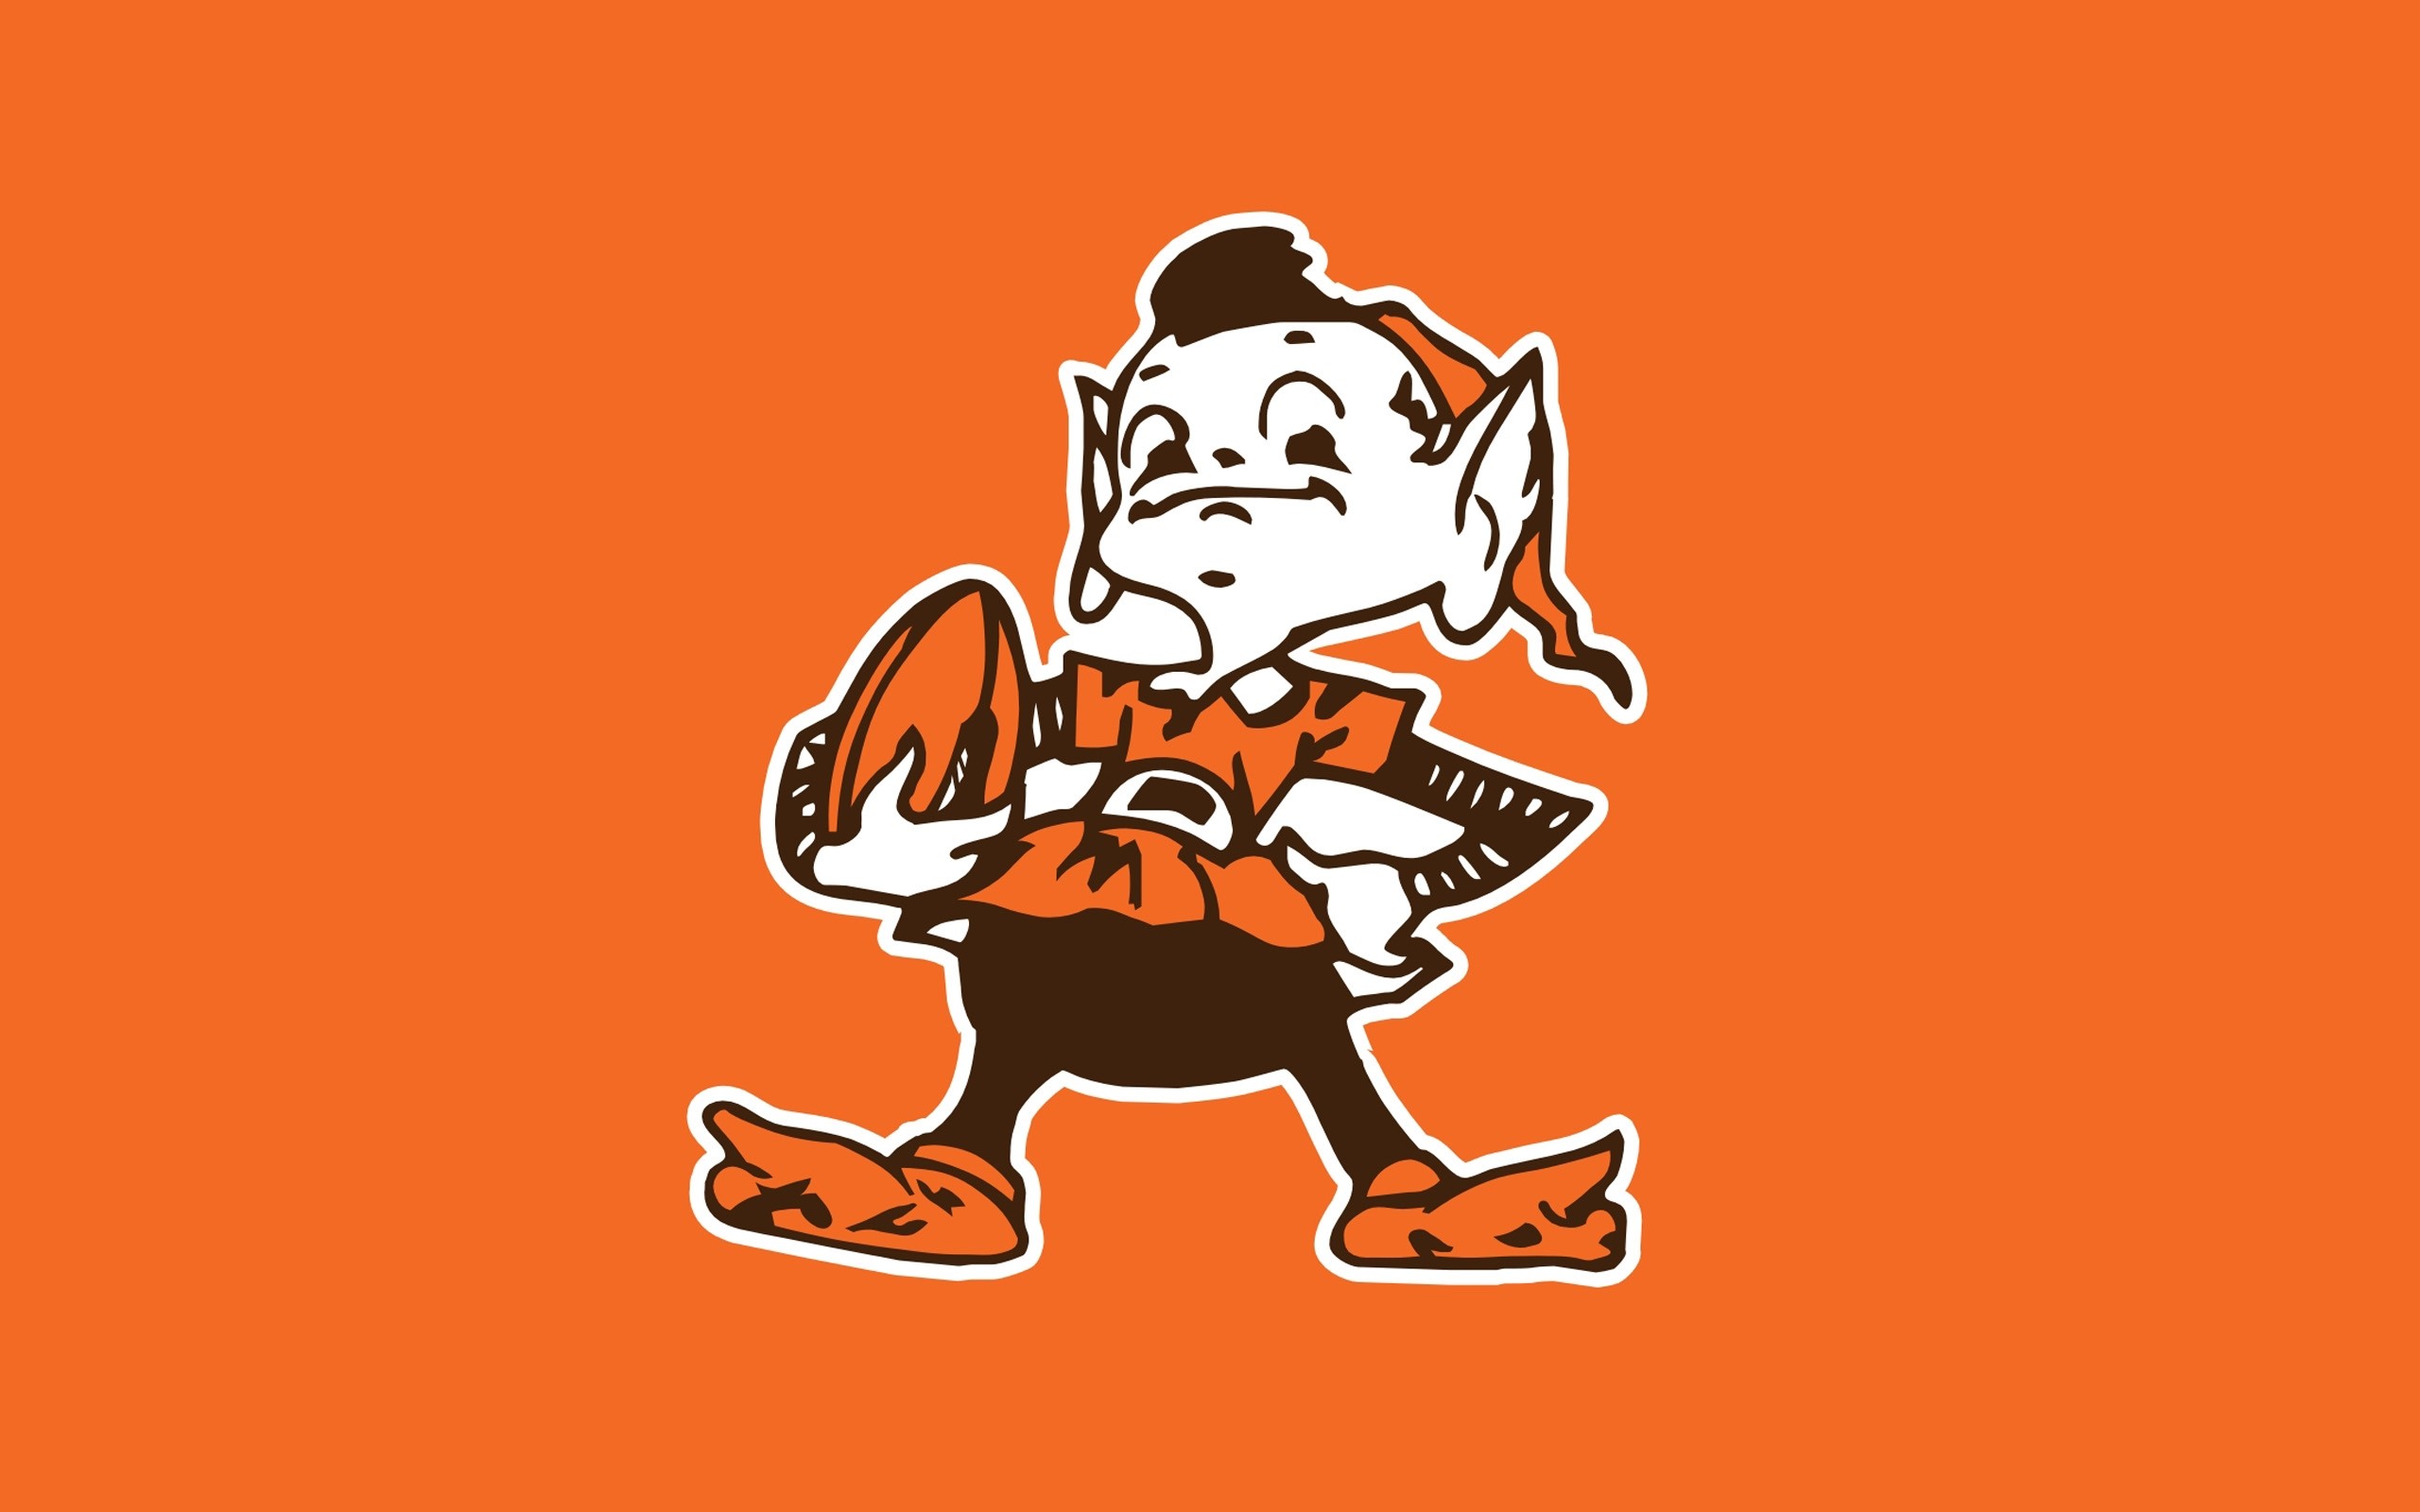 2560x1600 Cleveland Browns: Cleveland Browns will unveil new logo .